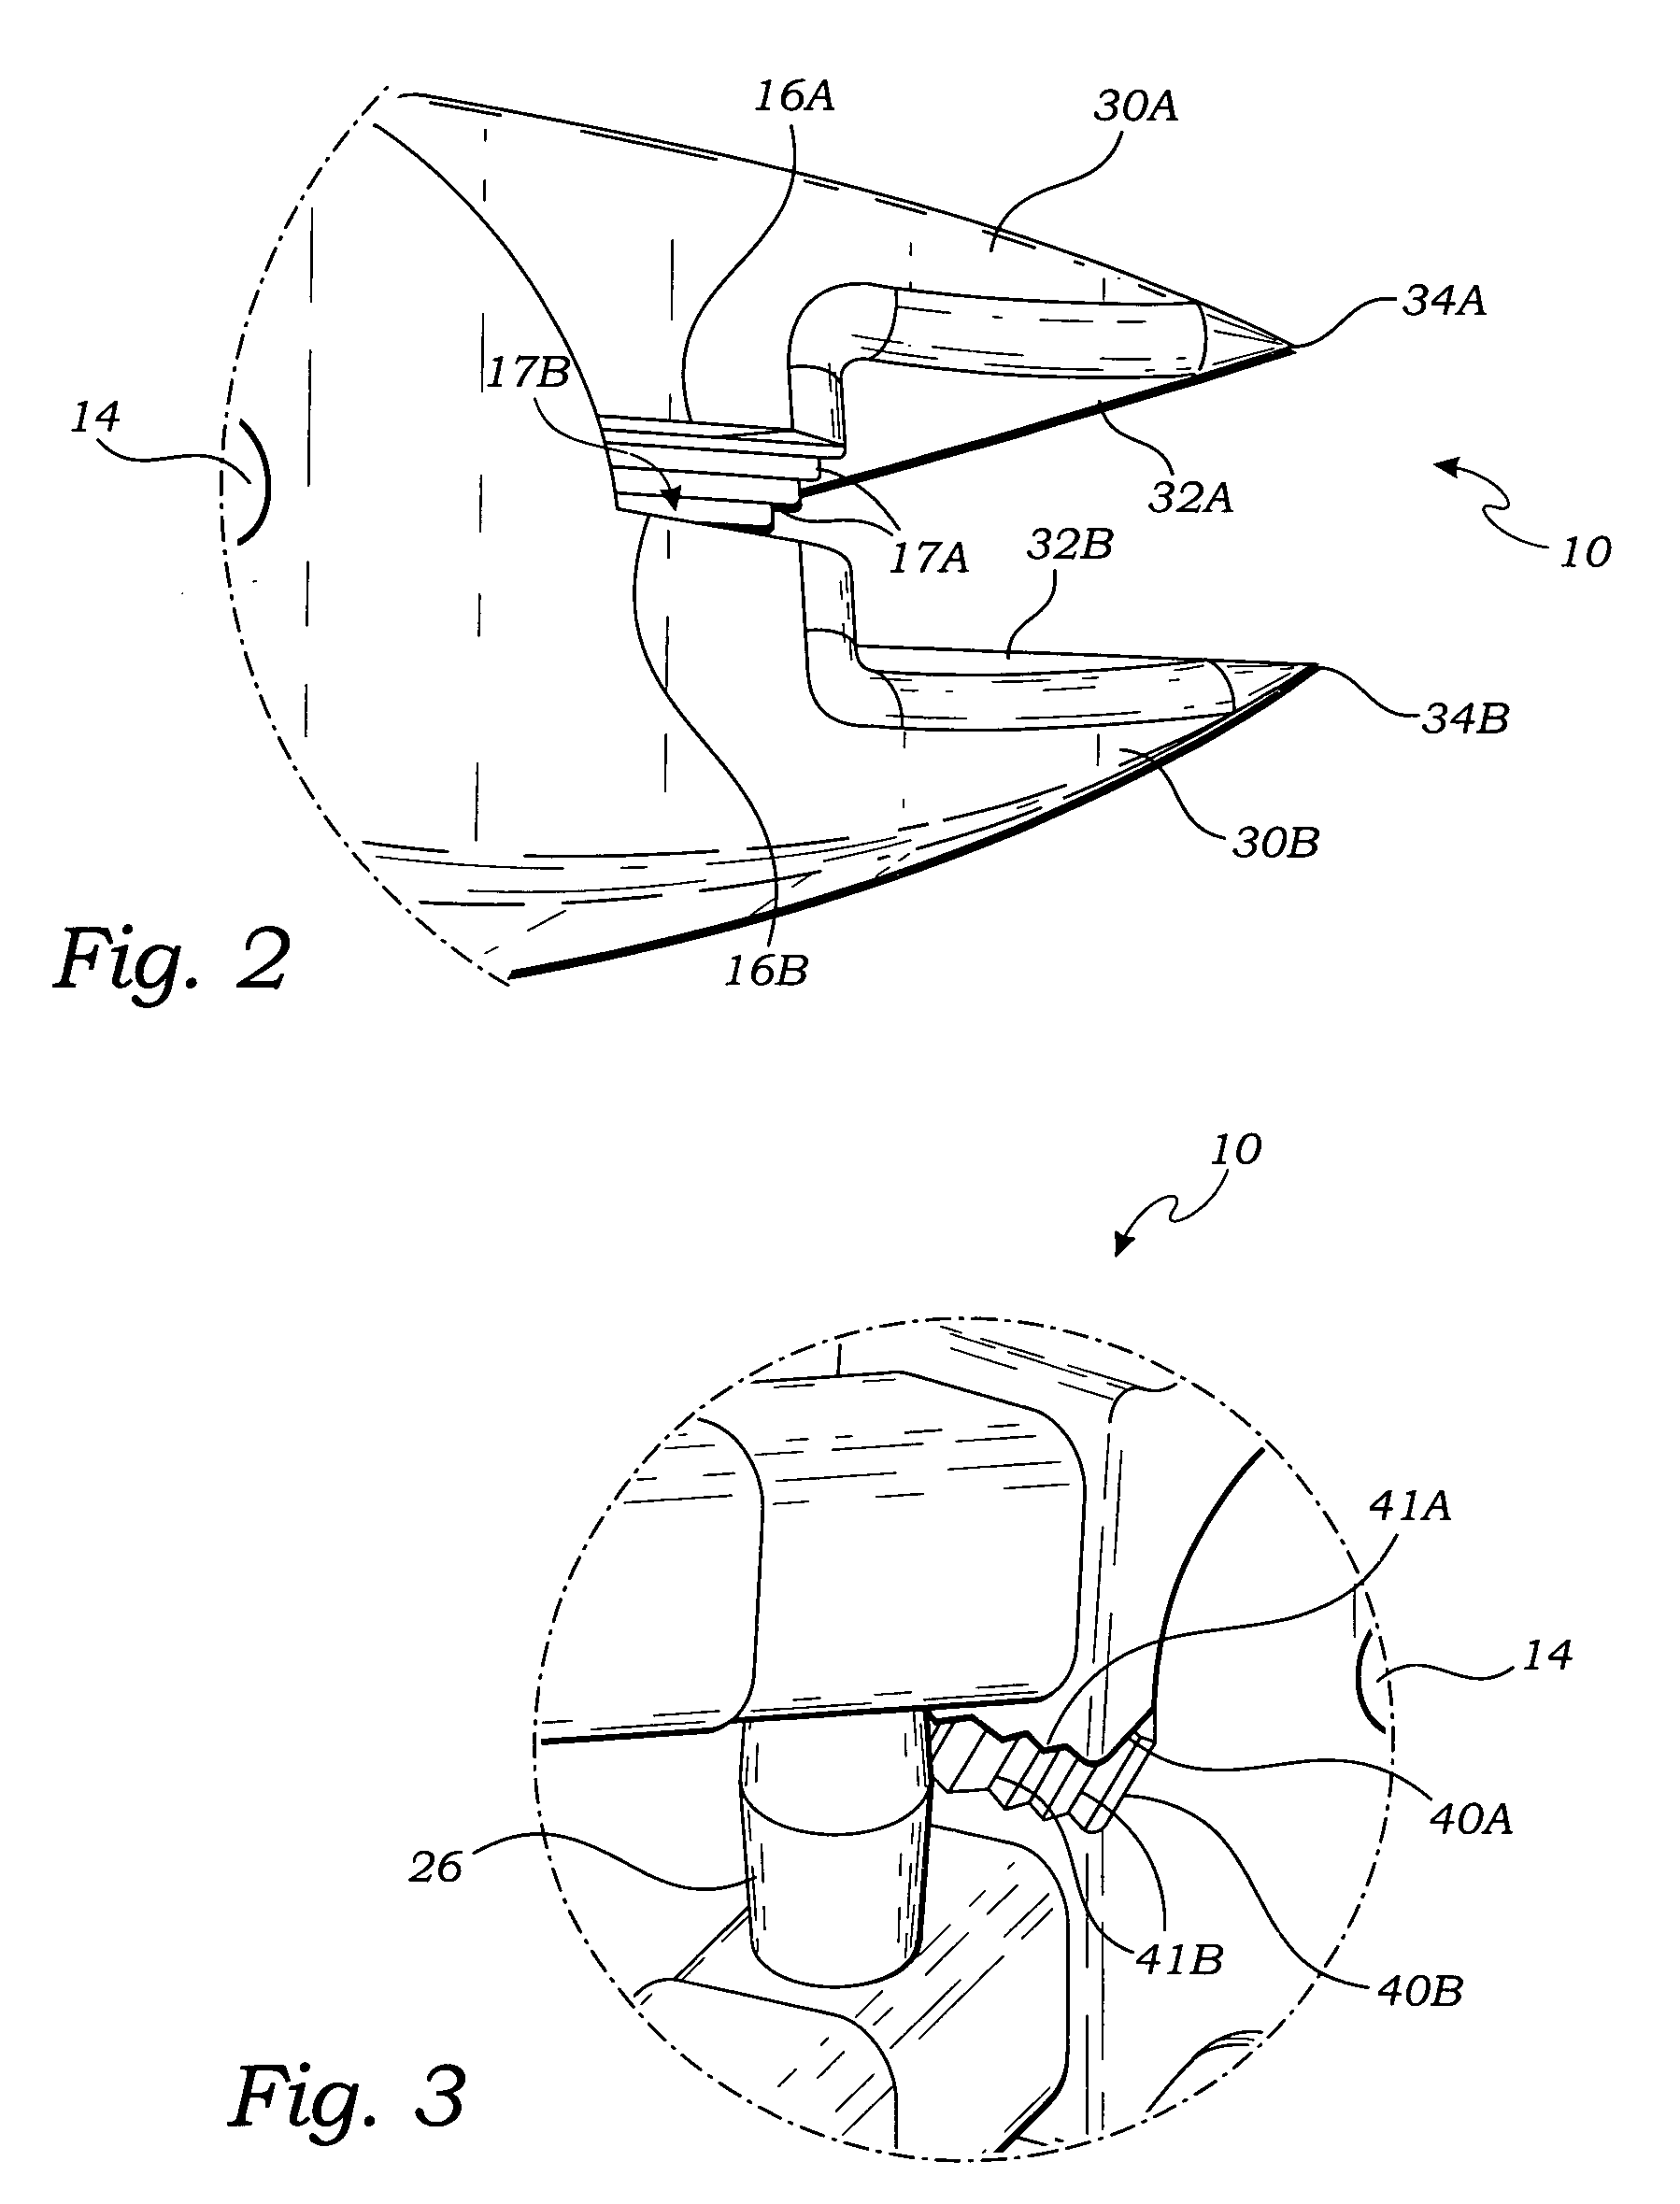 Hand tool for extracting a fastener from a material